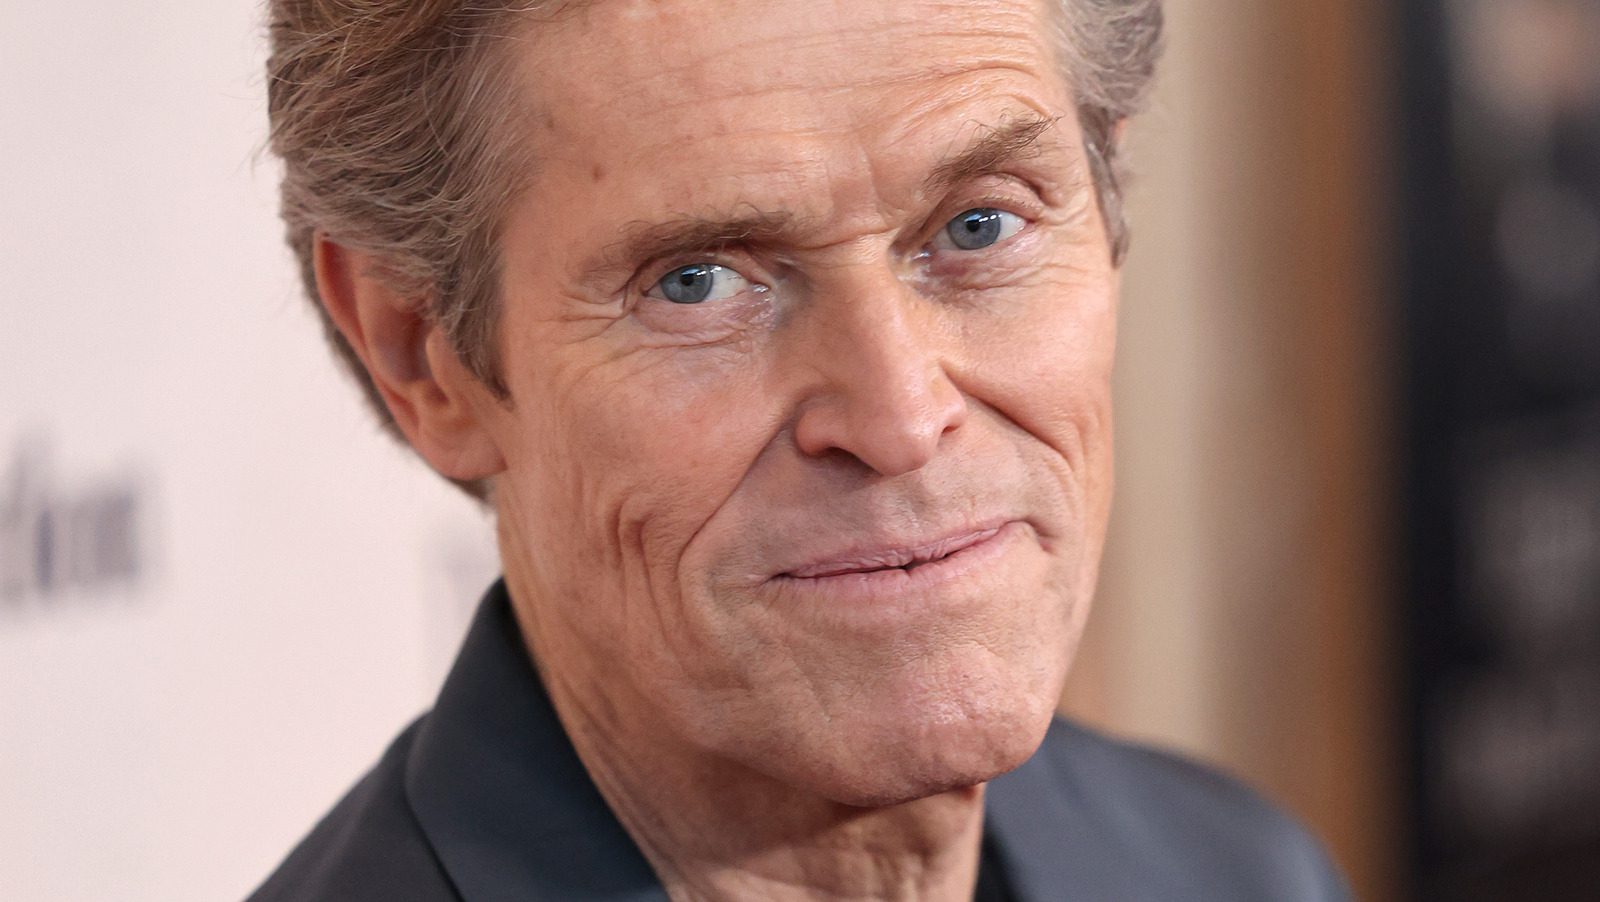 The Kingkiller Chronicle Fans Envision Willem Dafoe As Their Ideal Actor For The Cthaeh